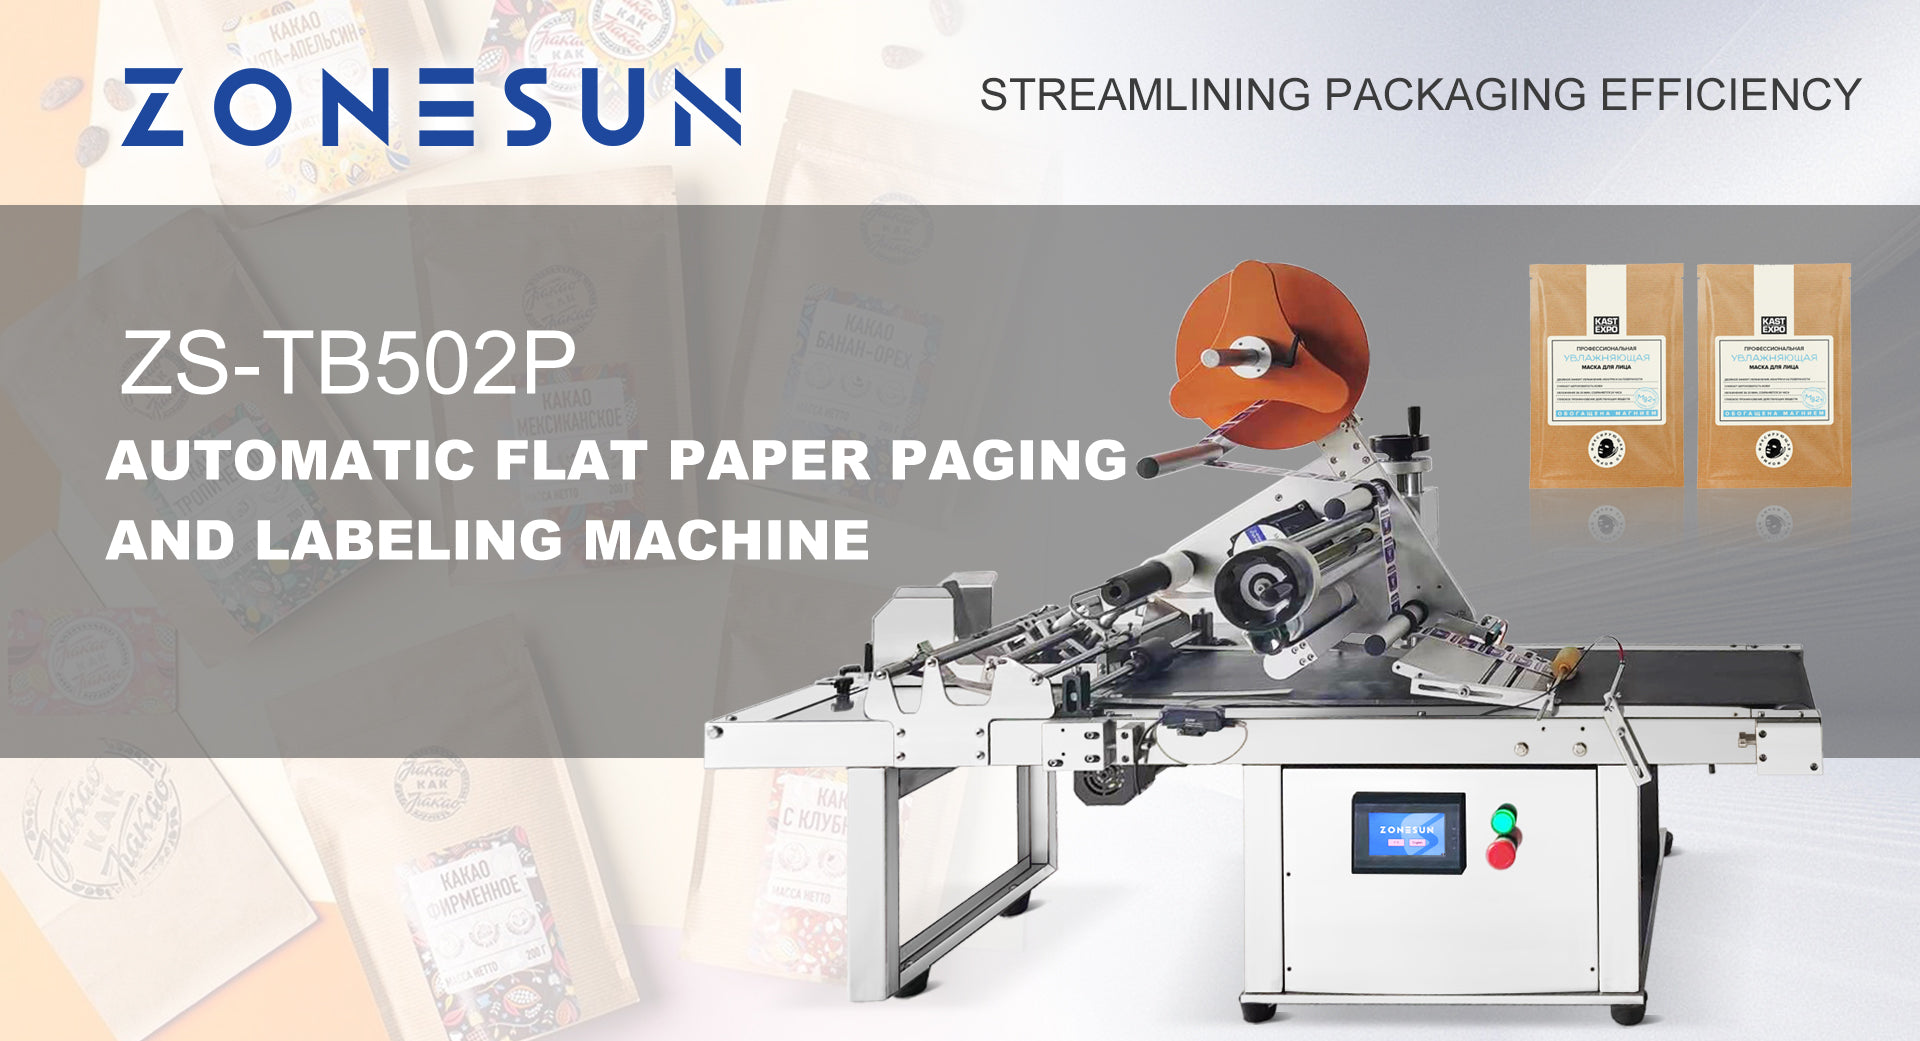 ZONESUN ZS-TB502P Automatic Flat Paper Paging and Labeling Machine: Streamlining Packaging Efficiency